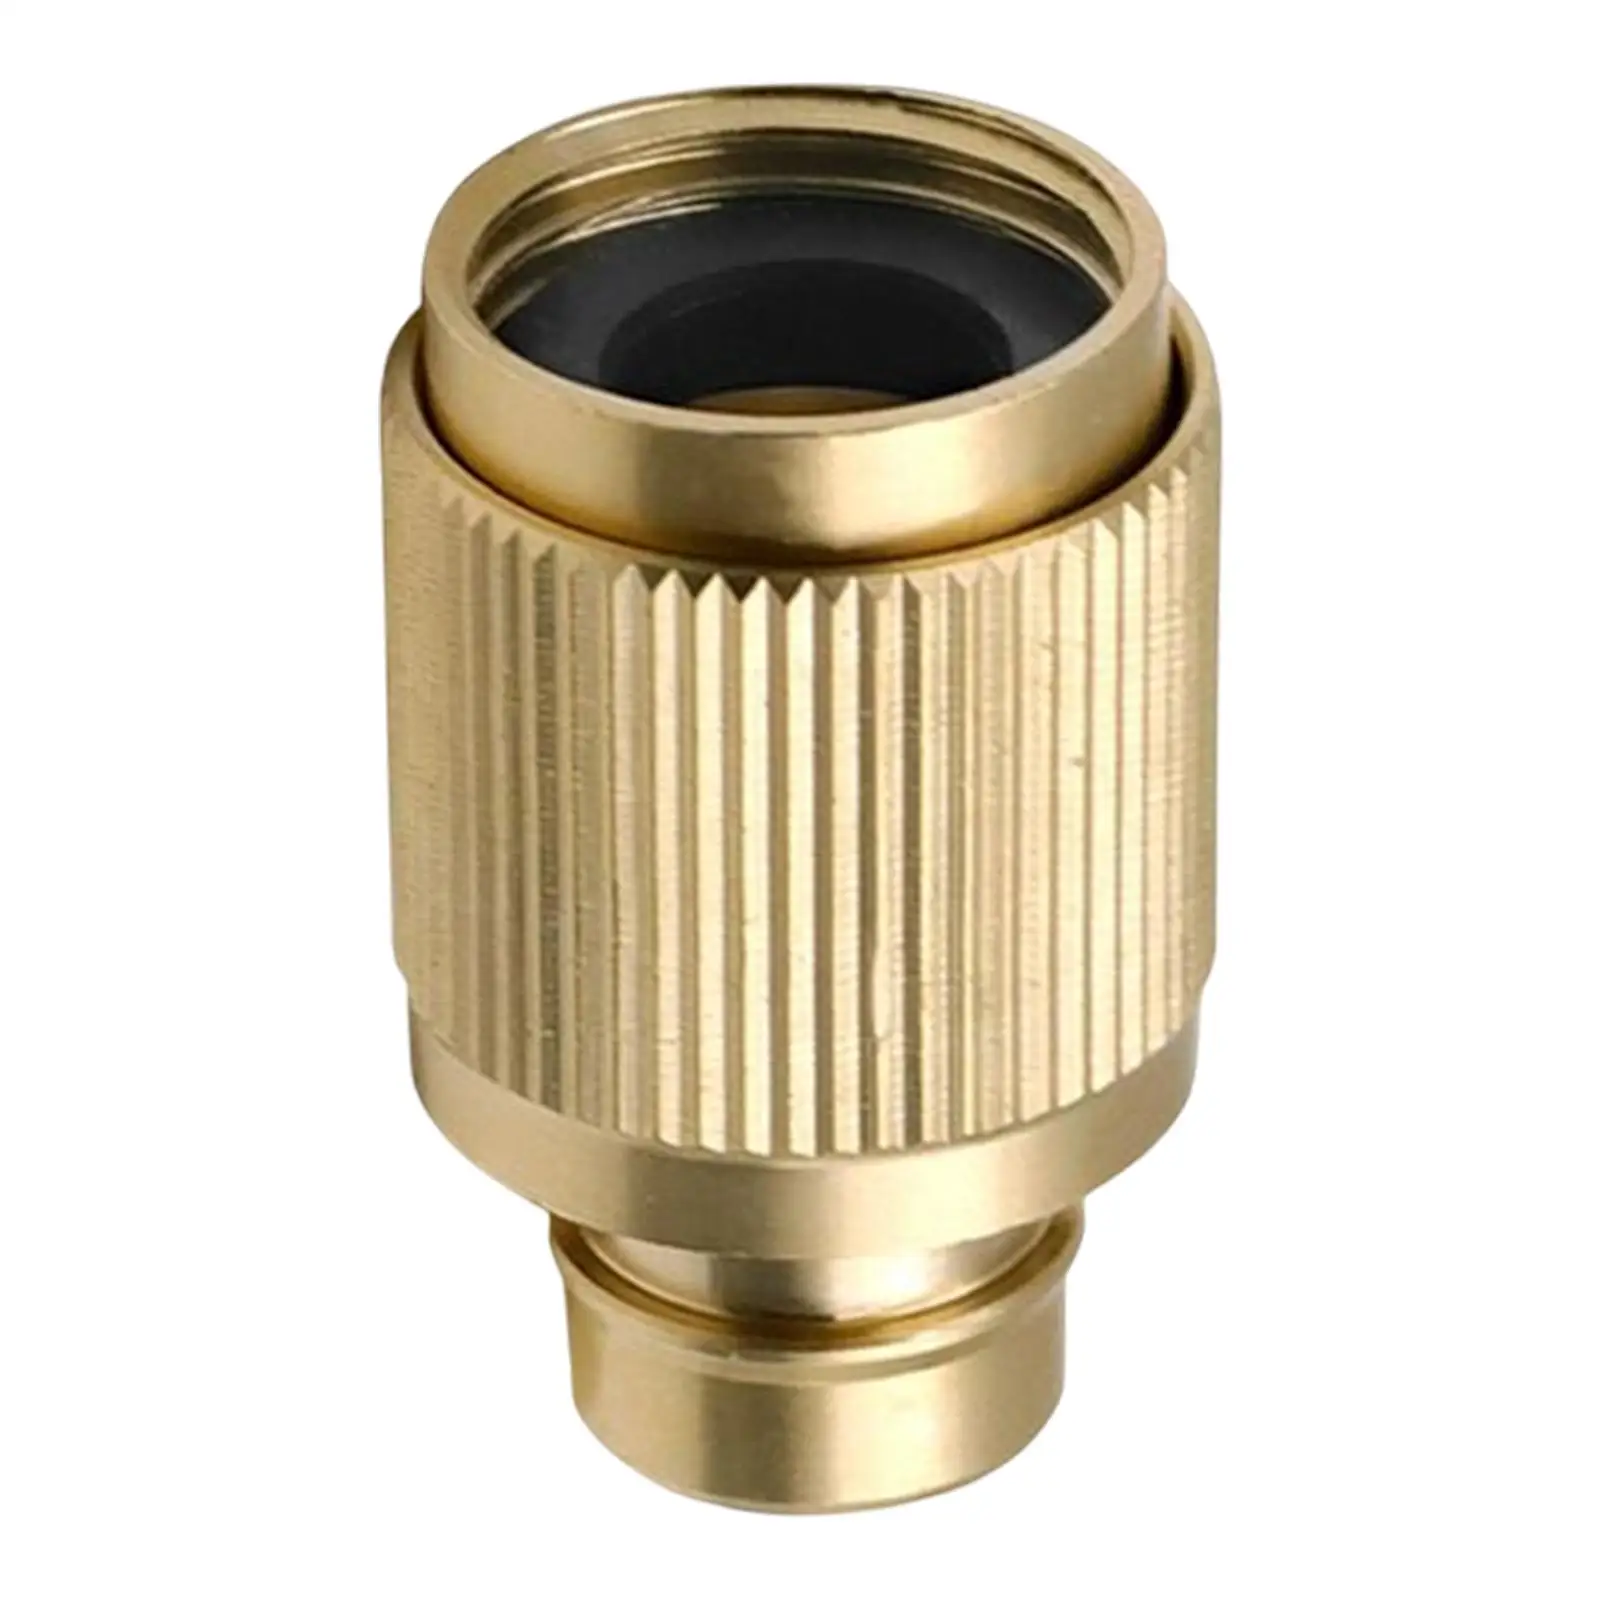 Water Hose Connector Multifunctional Quick Connector for Washing Machine